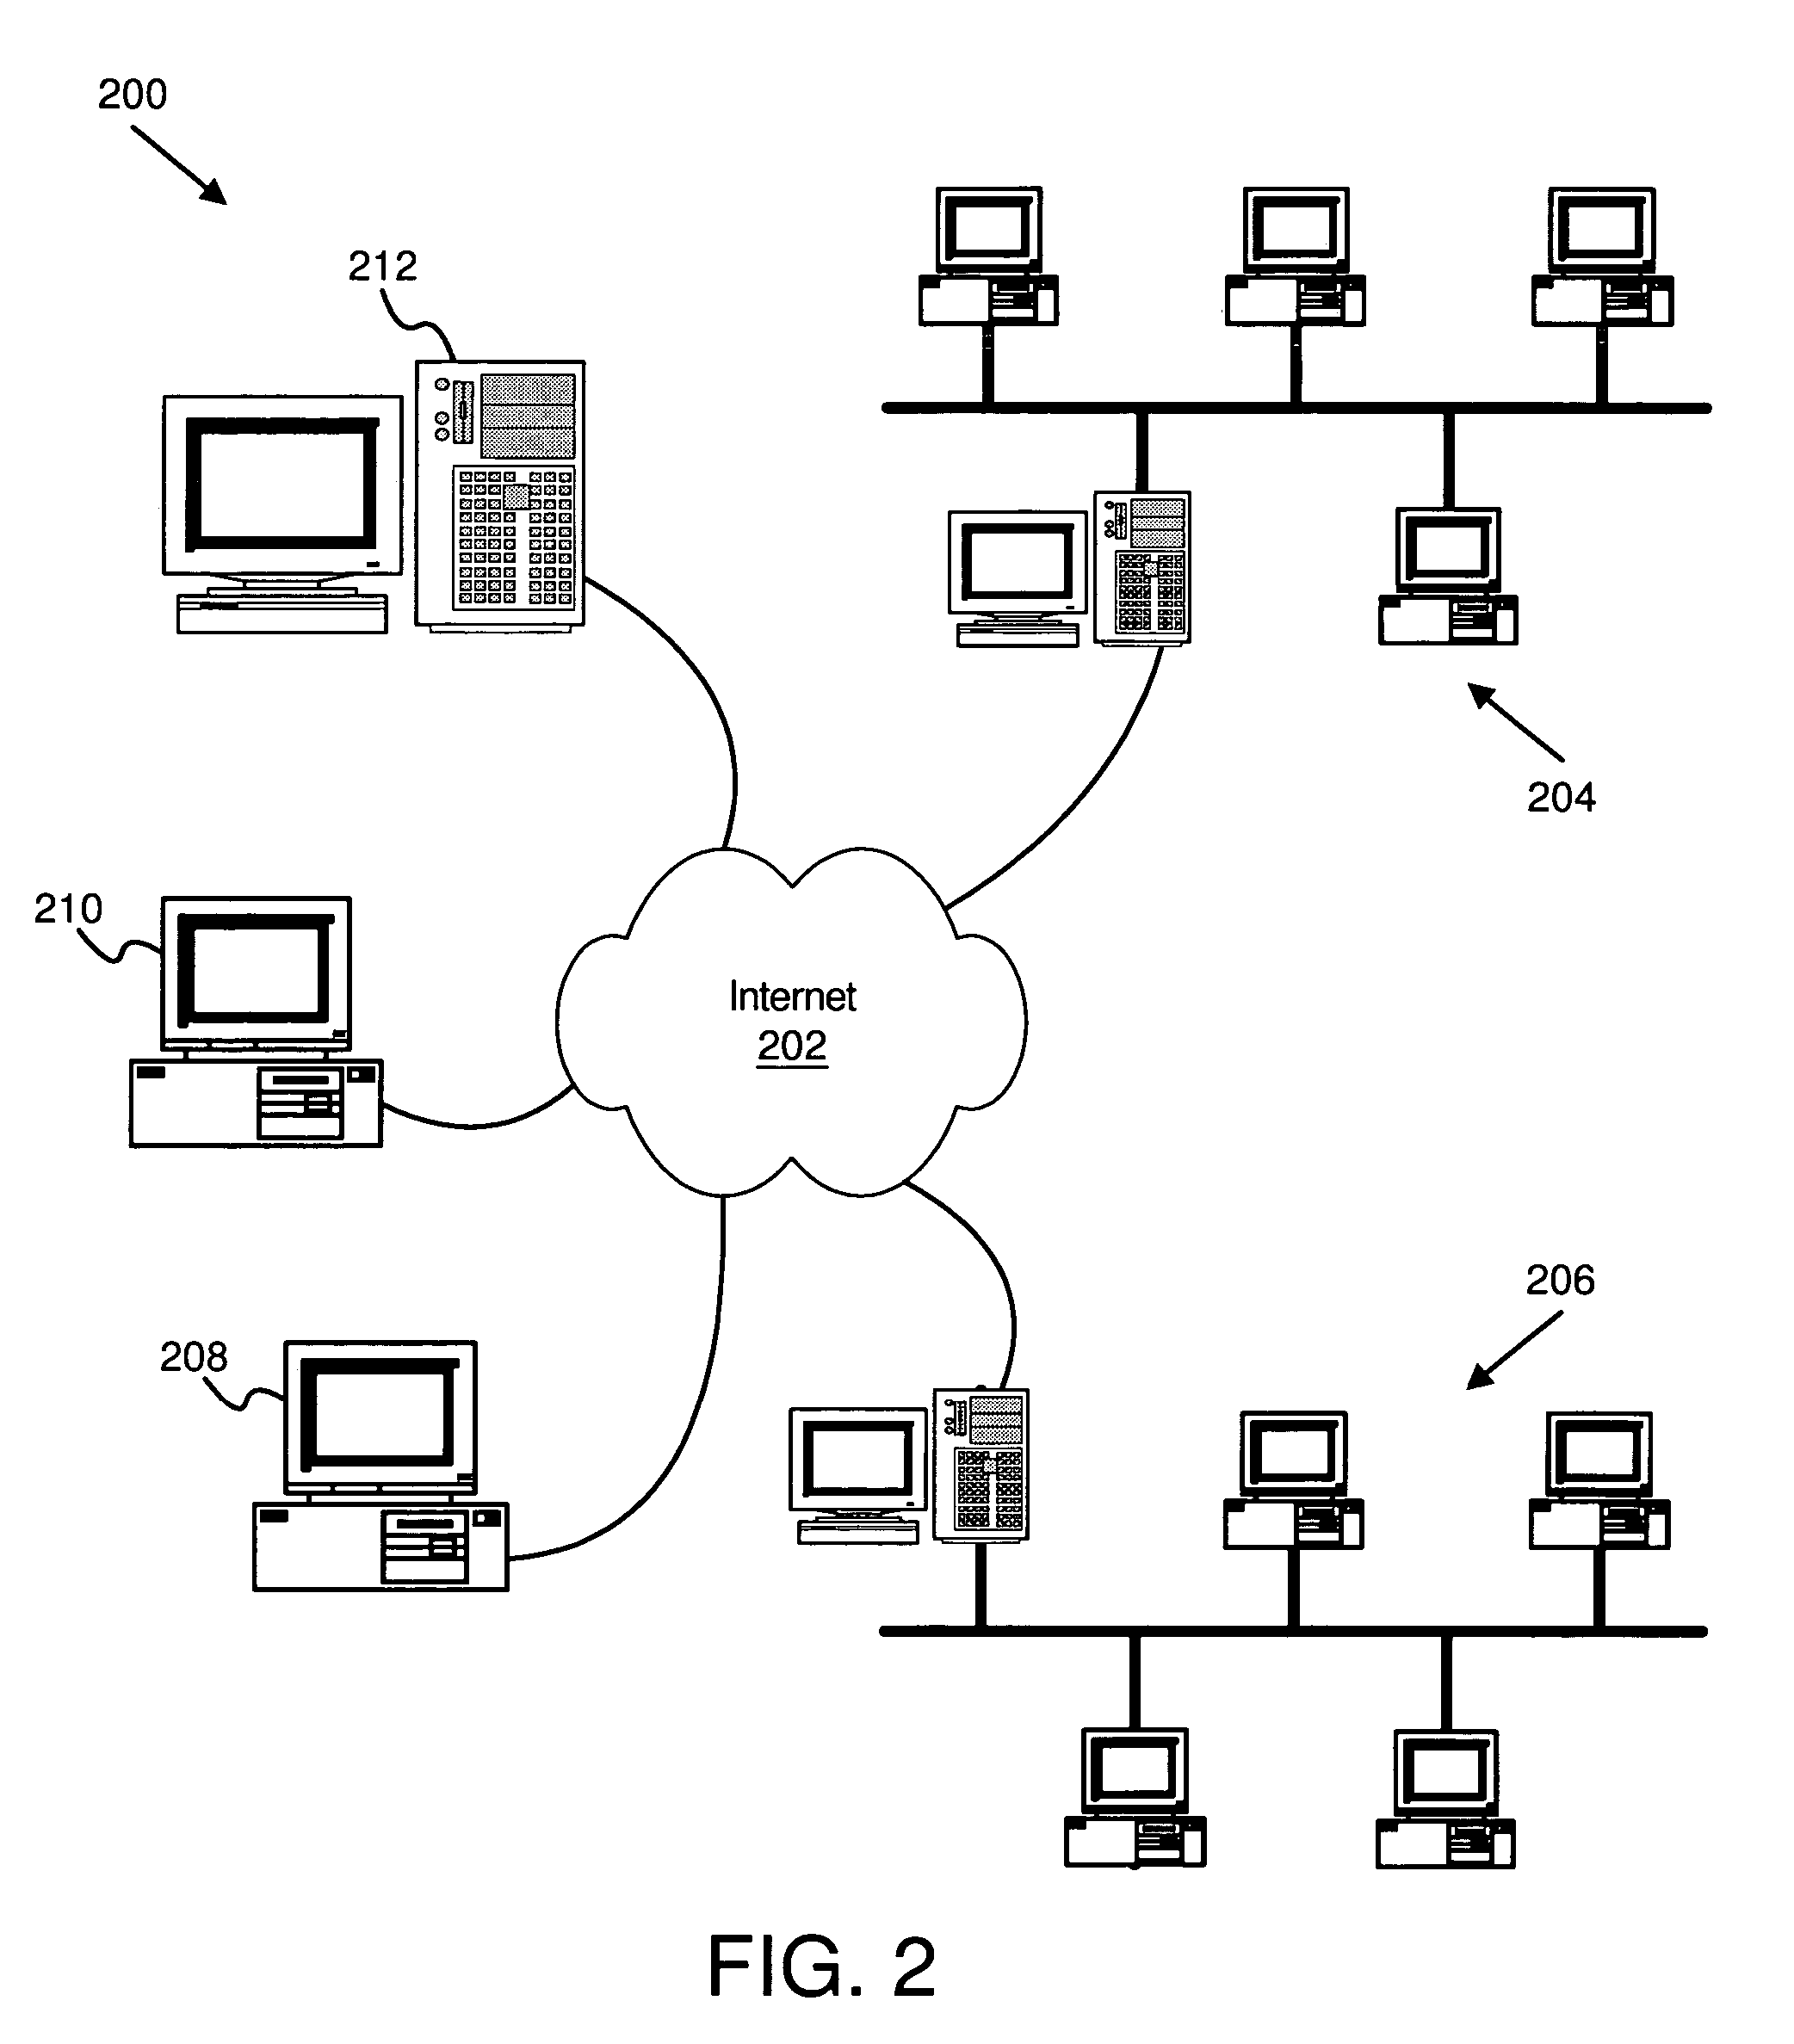 Apparatus, system, and method for on-demand control of grid system resources